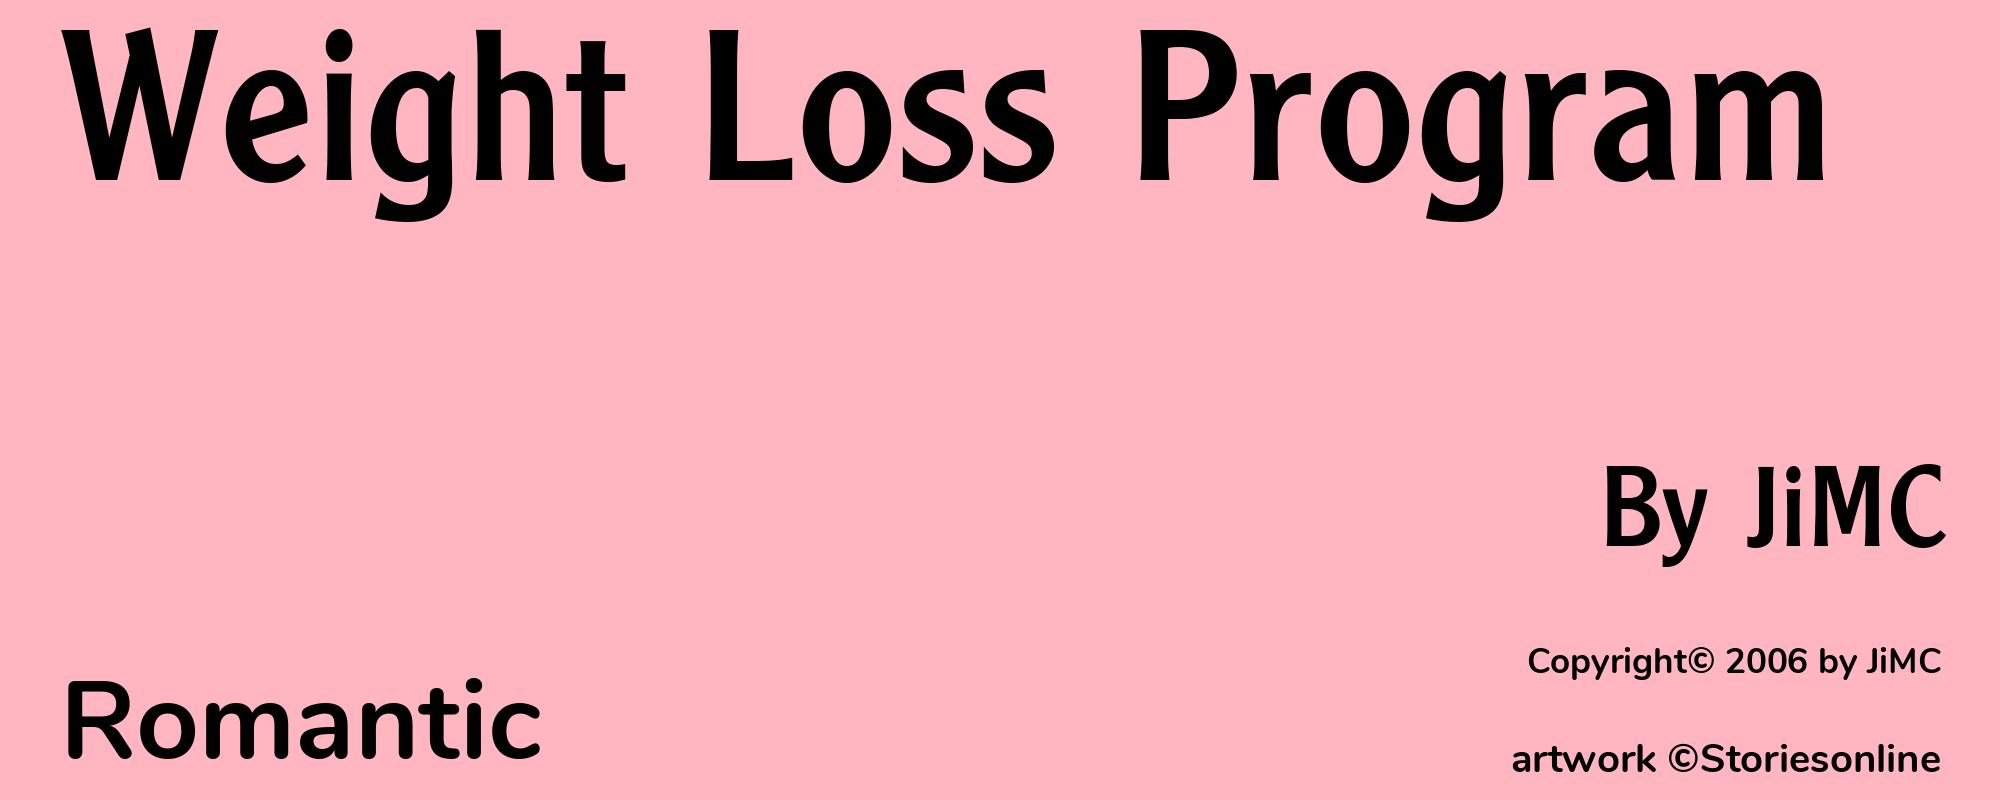 Weight Loss Program - Cover